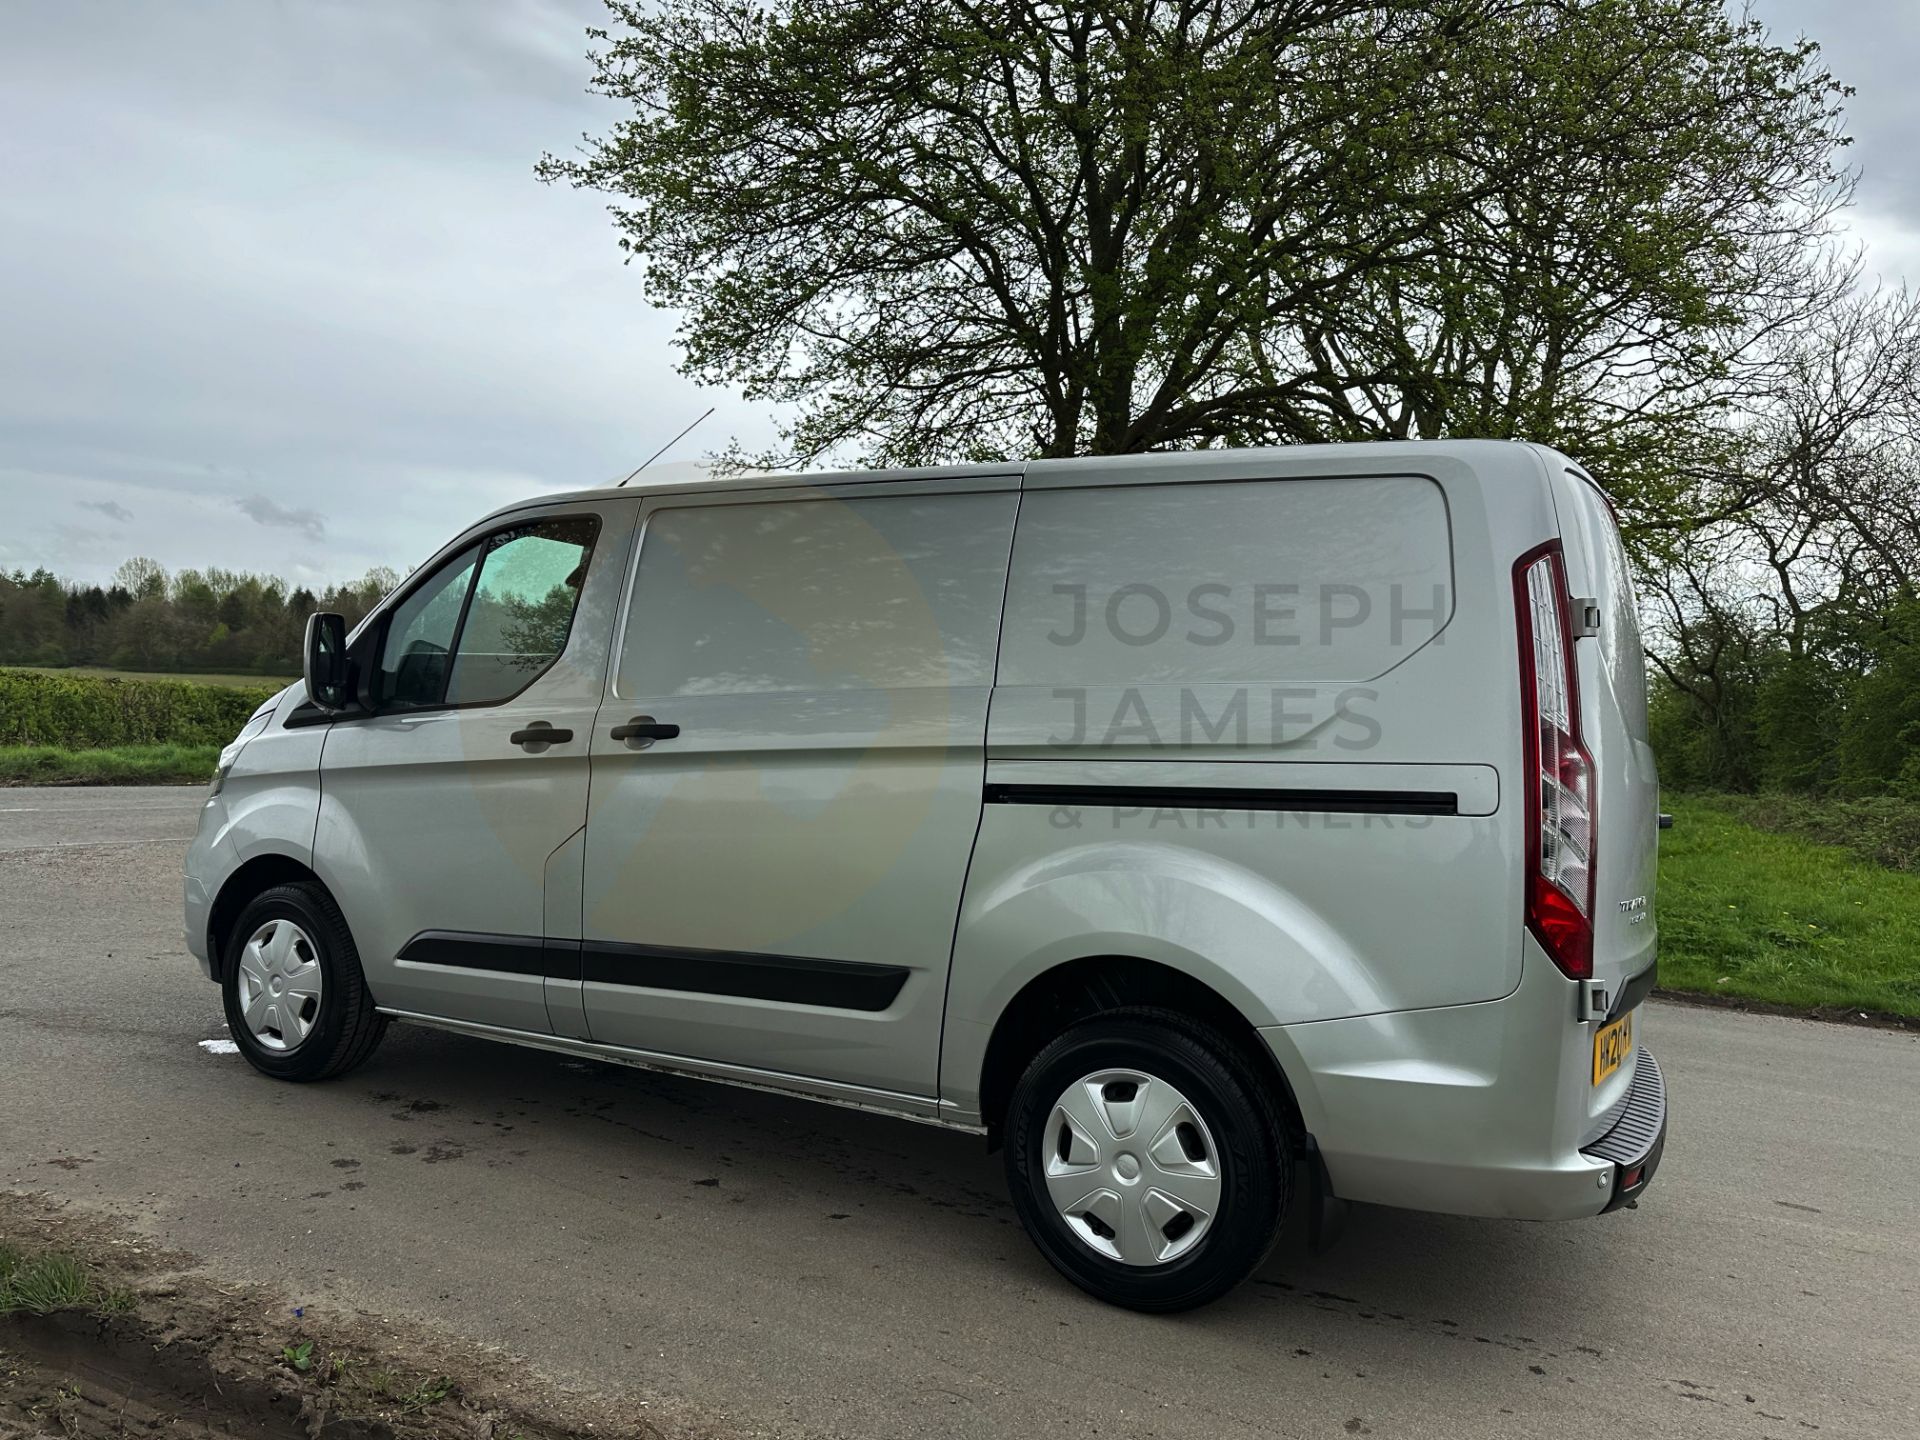 FORD TRANSIT CUSTOM "TREND" 2.0TDCI (130) 20 REG -1 OWNER- SILVER -GREAT SPEC -LOW MILEAGE - Image 9 of 38